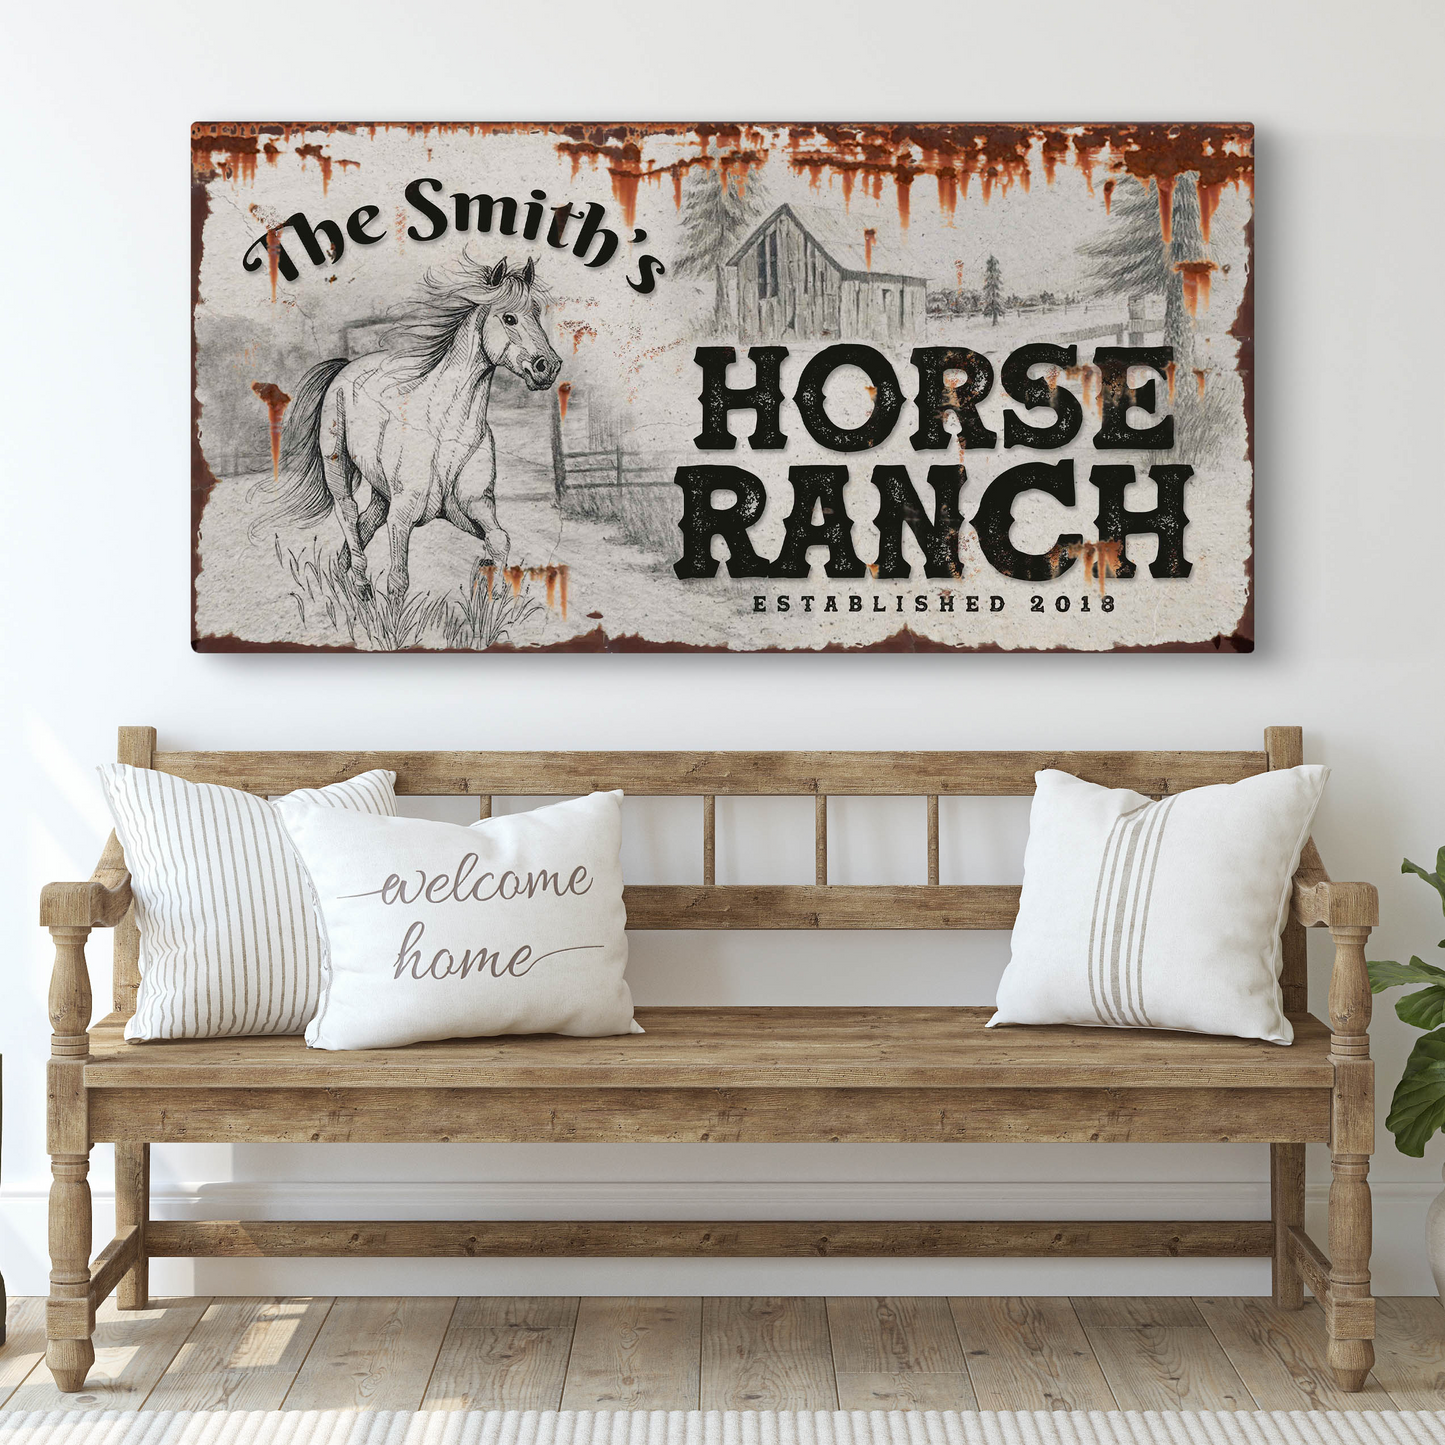 Rustic Horse Ranch Sign - Image by Tailored Canvases